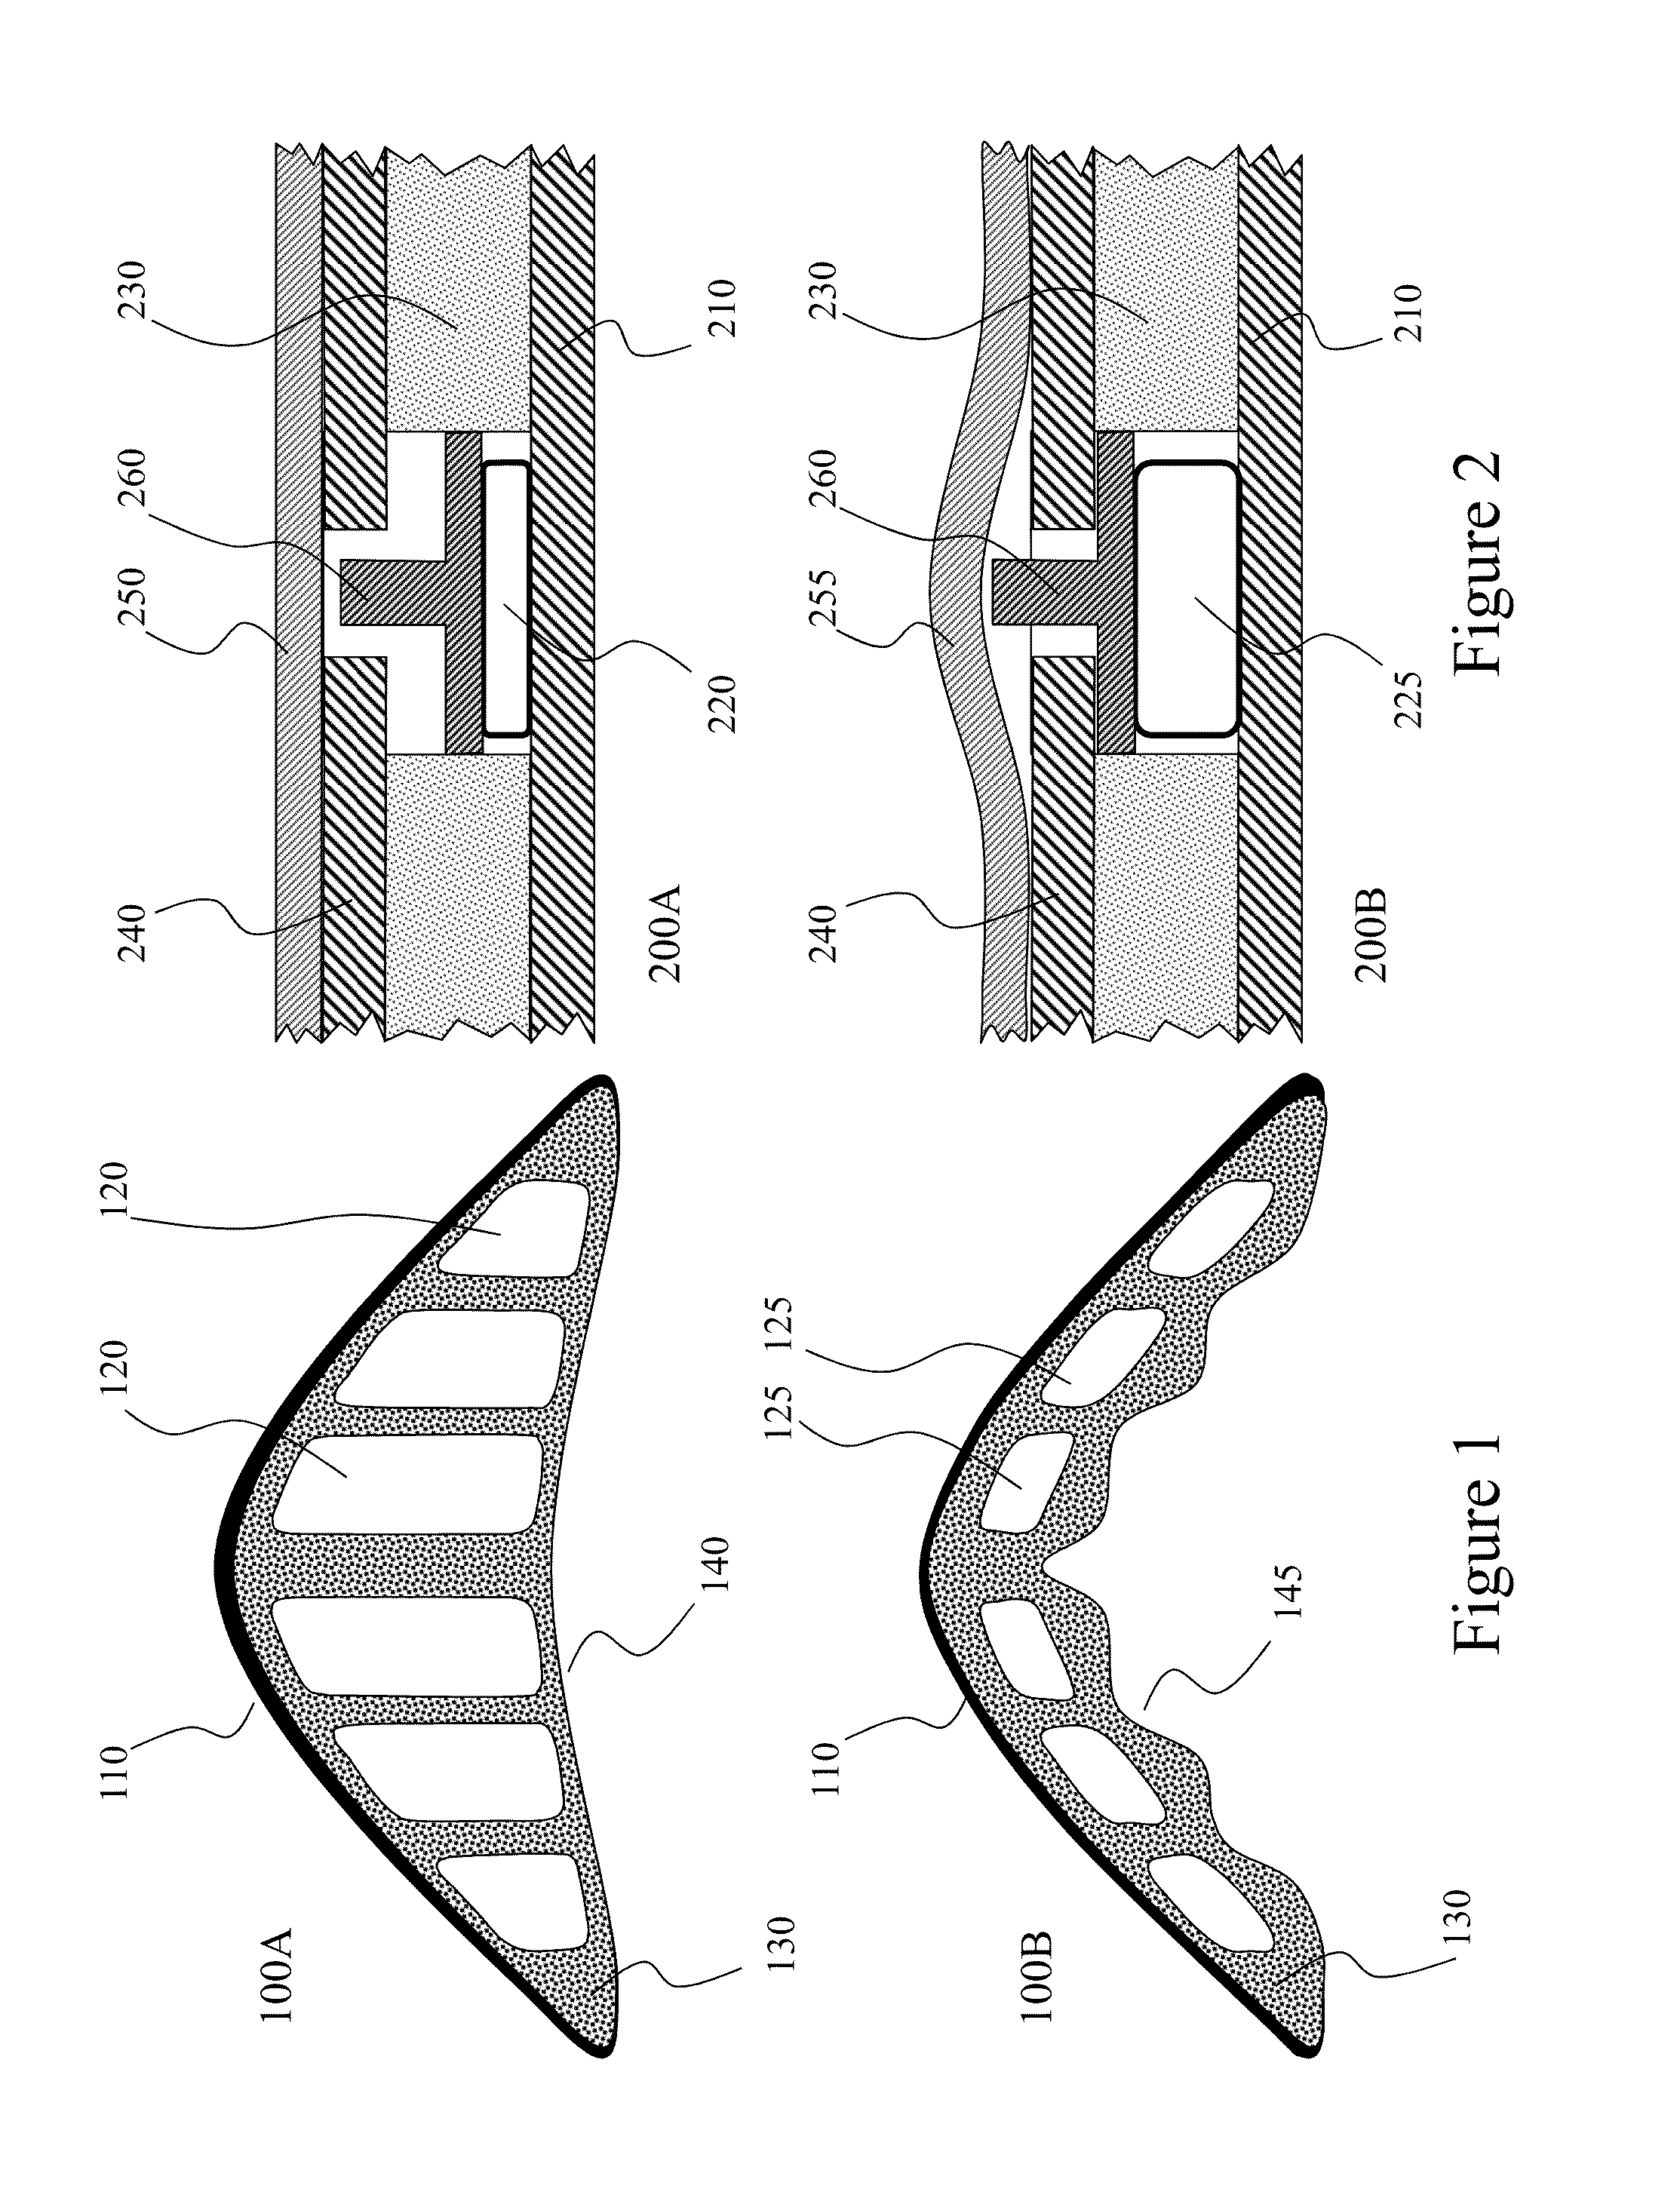 Fluidic Methods and Devices